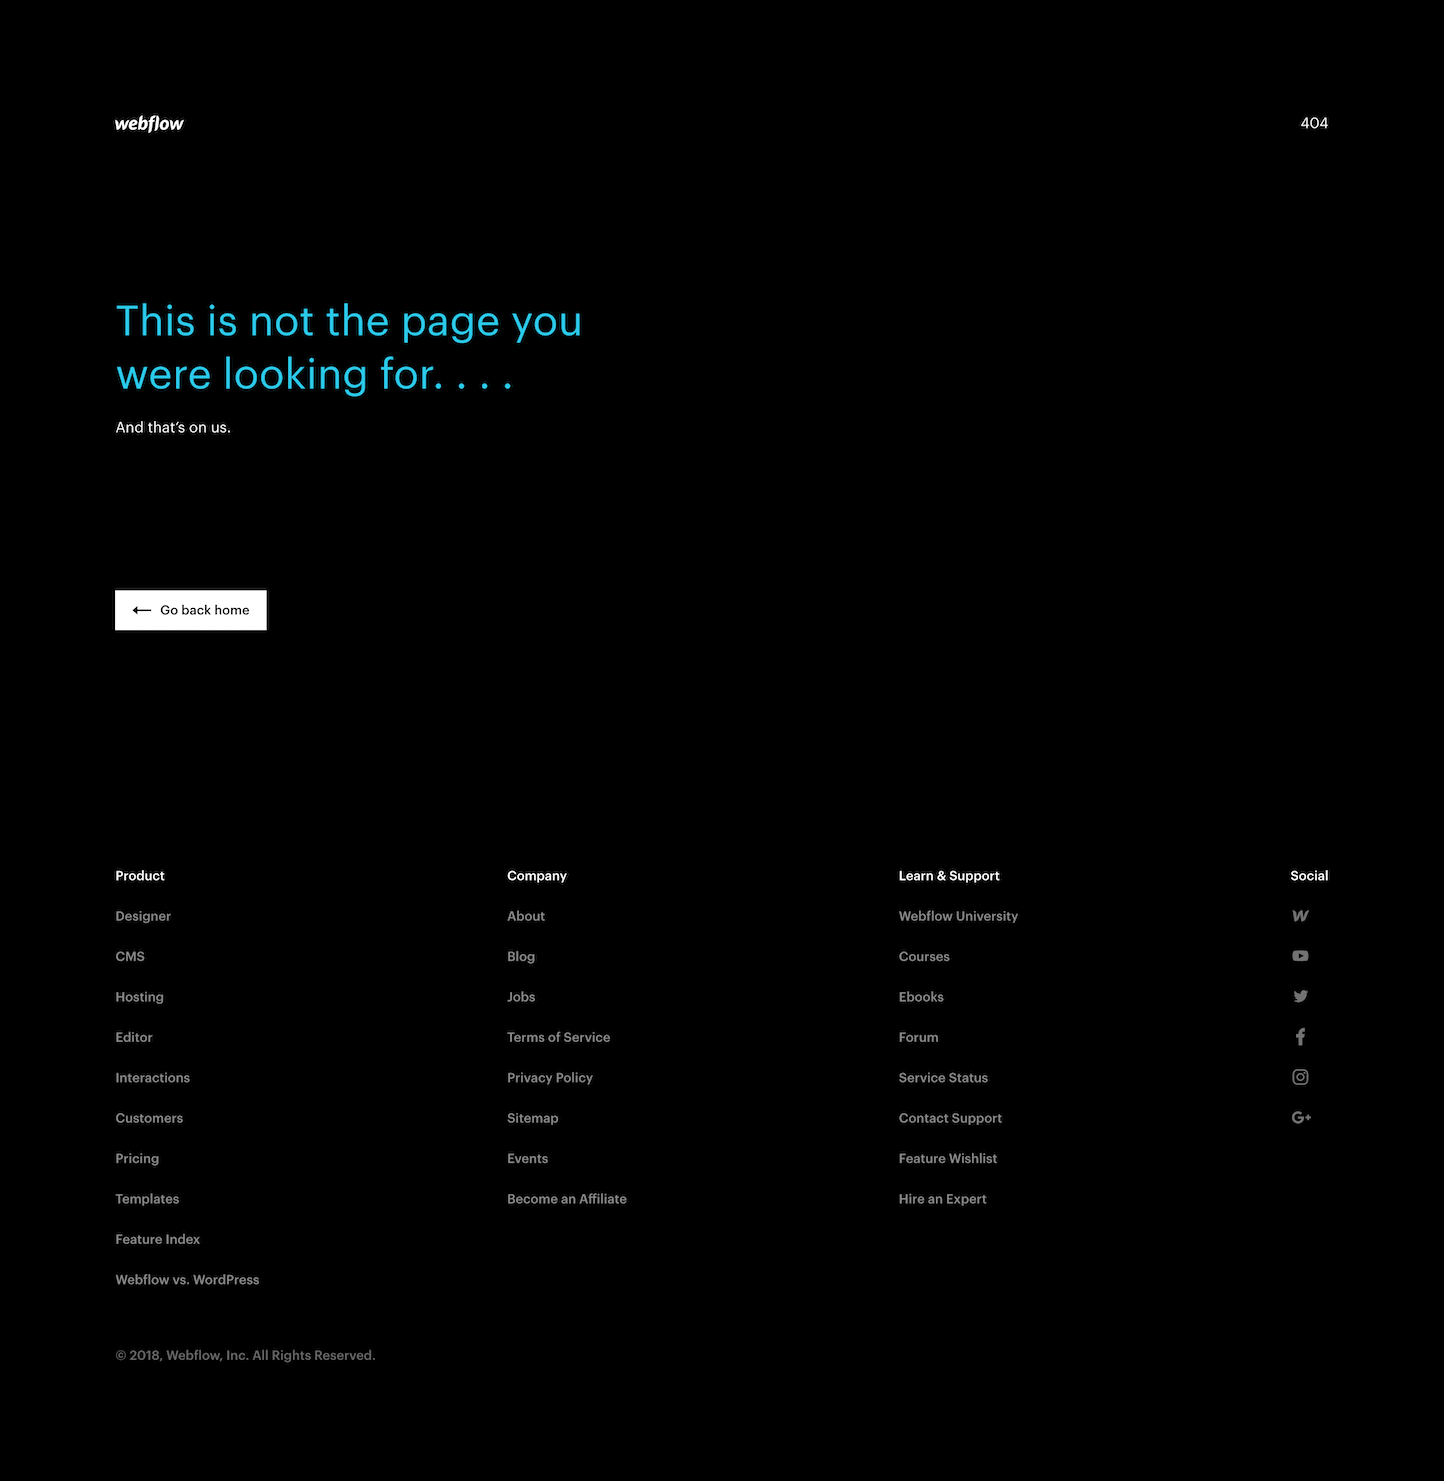 Screenshot of the 404 page from the Webflow website.